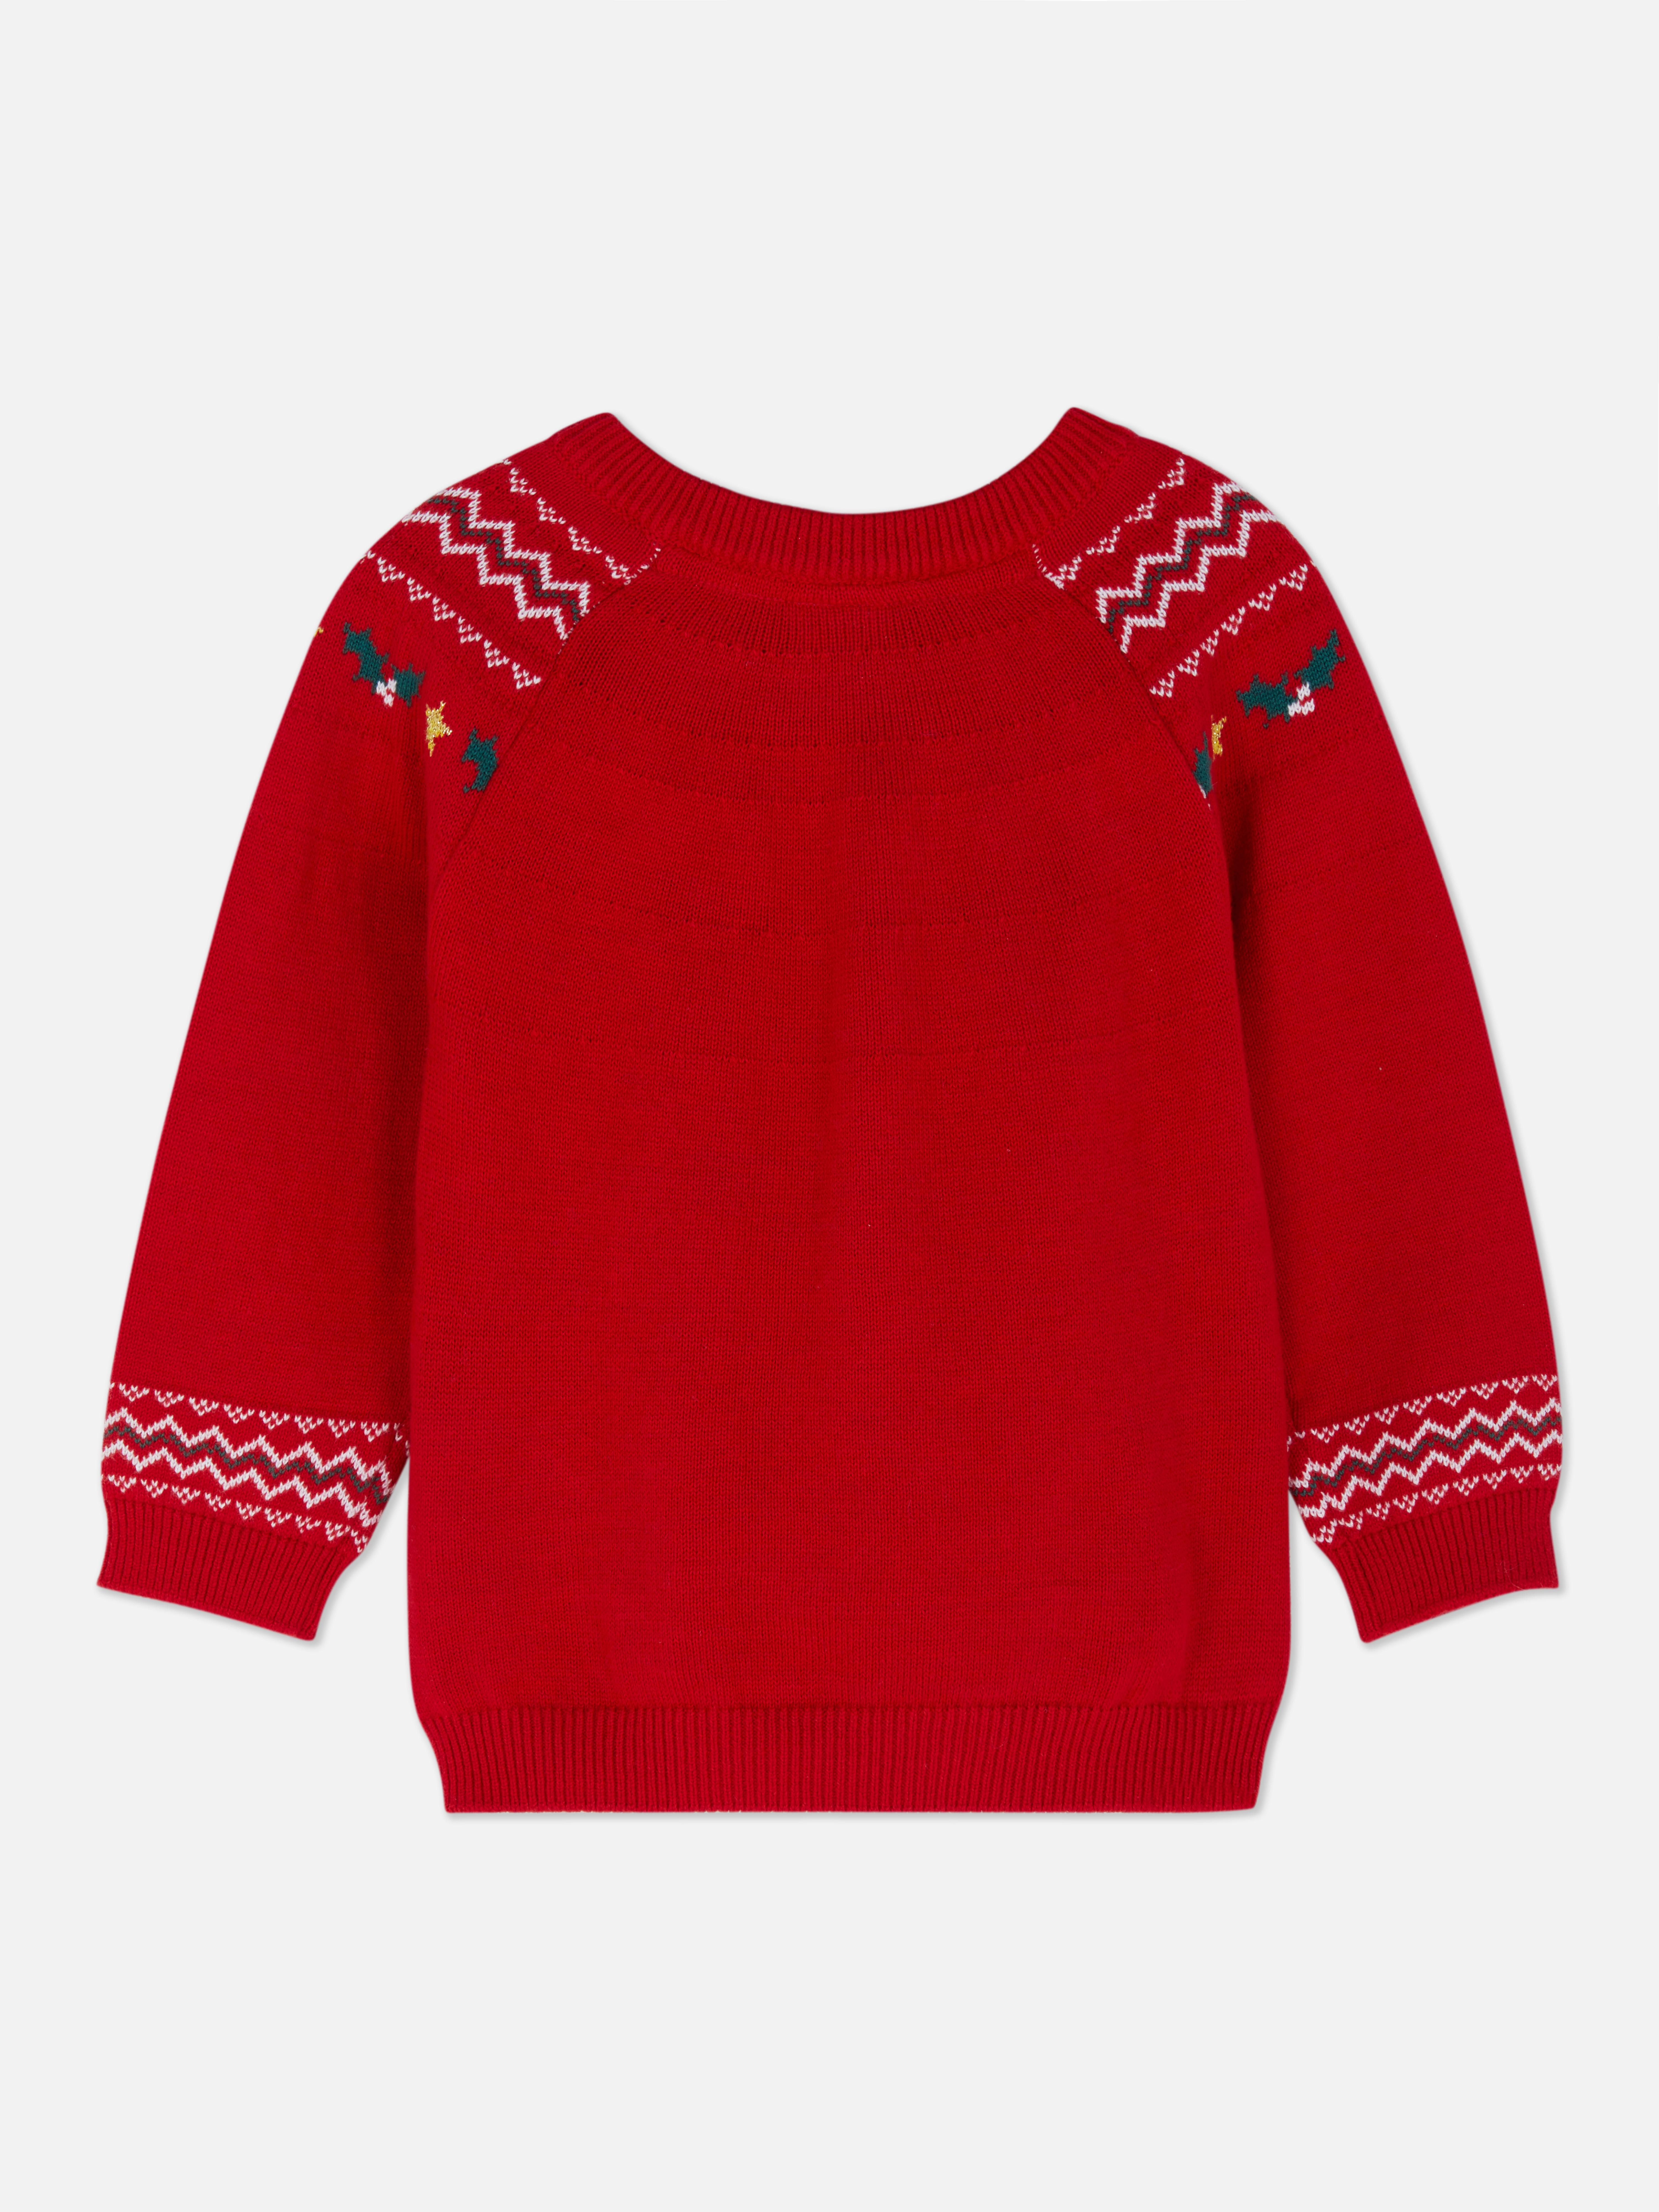 Disney's Mickey Mouse Christmas Jumper